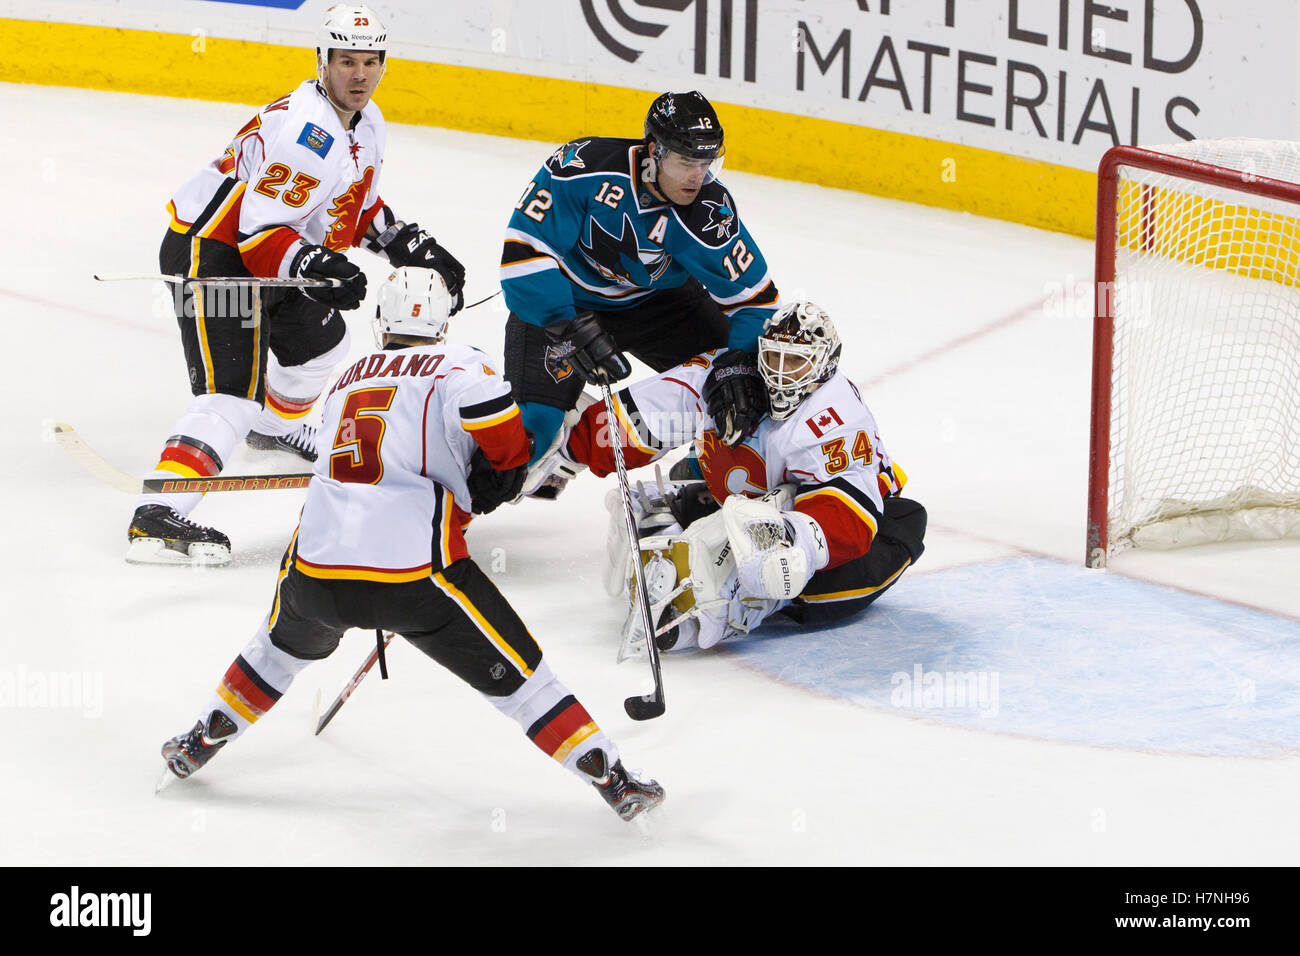 Feb 8, 2012; San Jose, CA, USA; San Jose Sharks left wing Patrick Marleau (12) collides with Calgary Flames goalie Miikka Kiprusoff (34) in front of the goal during the third period at HP Pavilion. Calgary defeated San Jose 4-3. Stock Photo